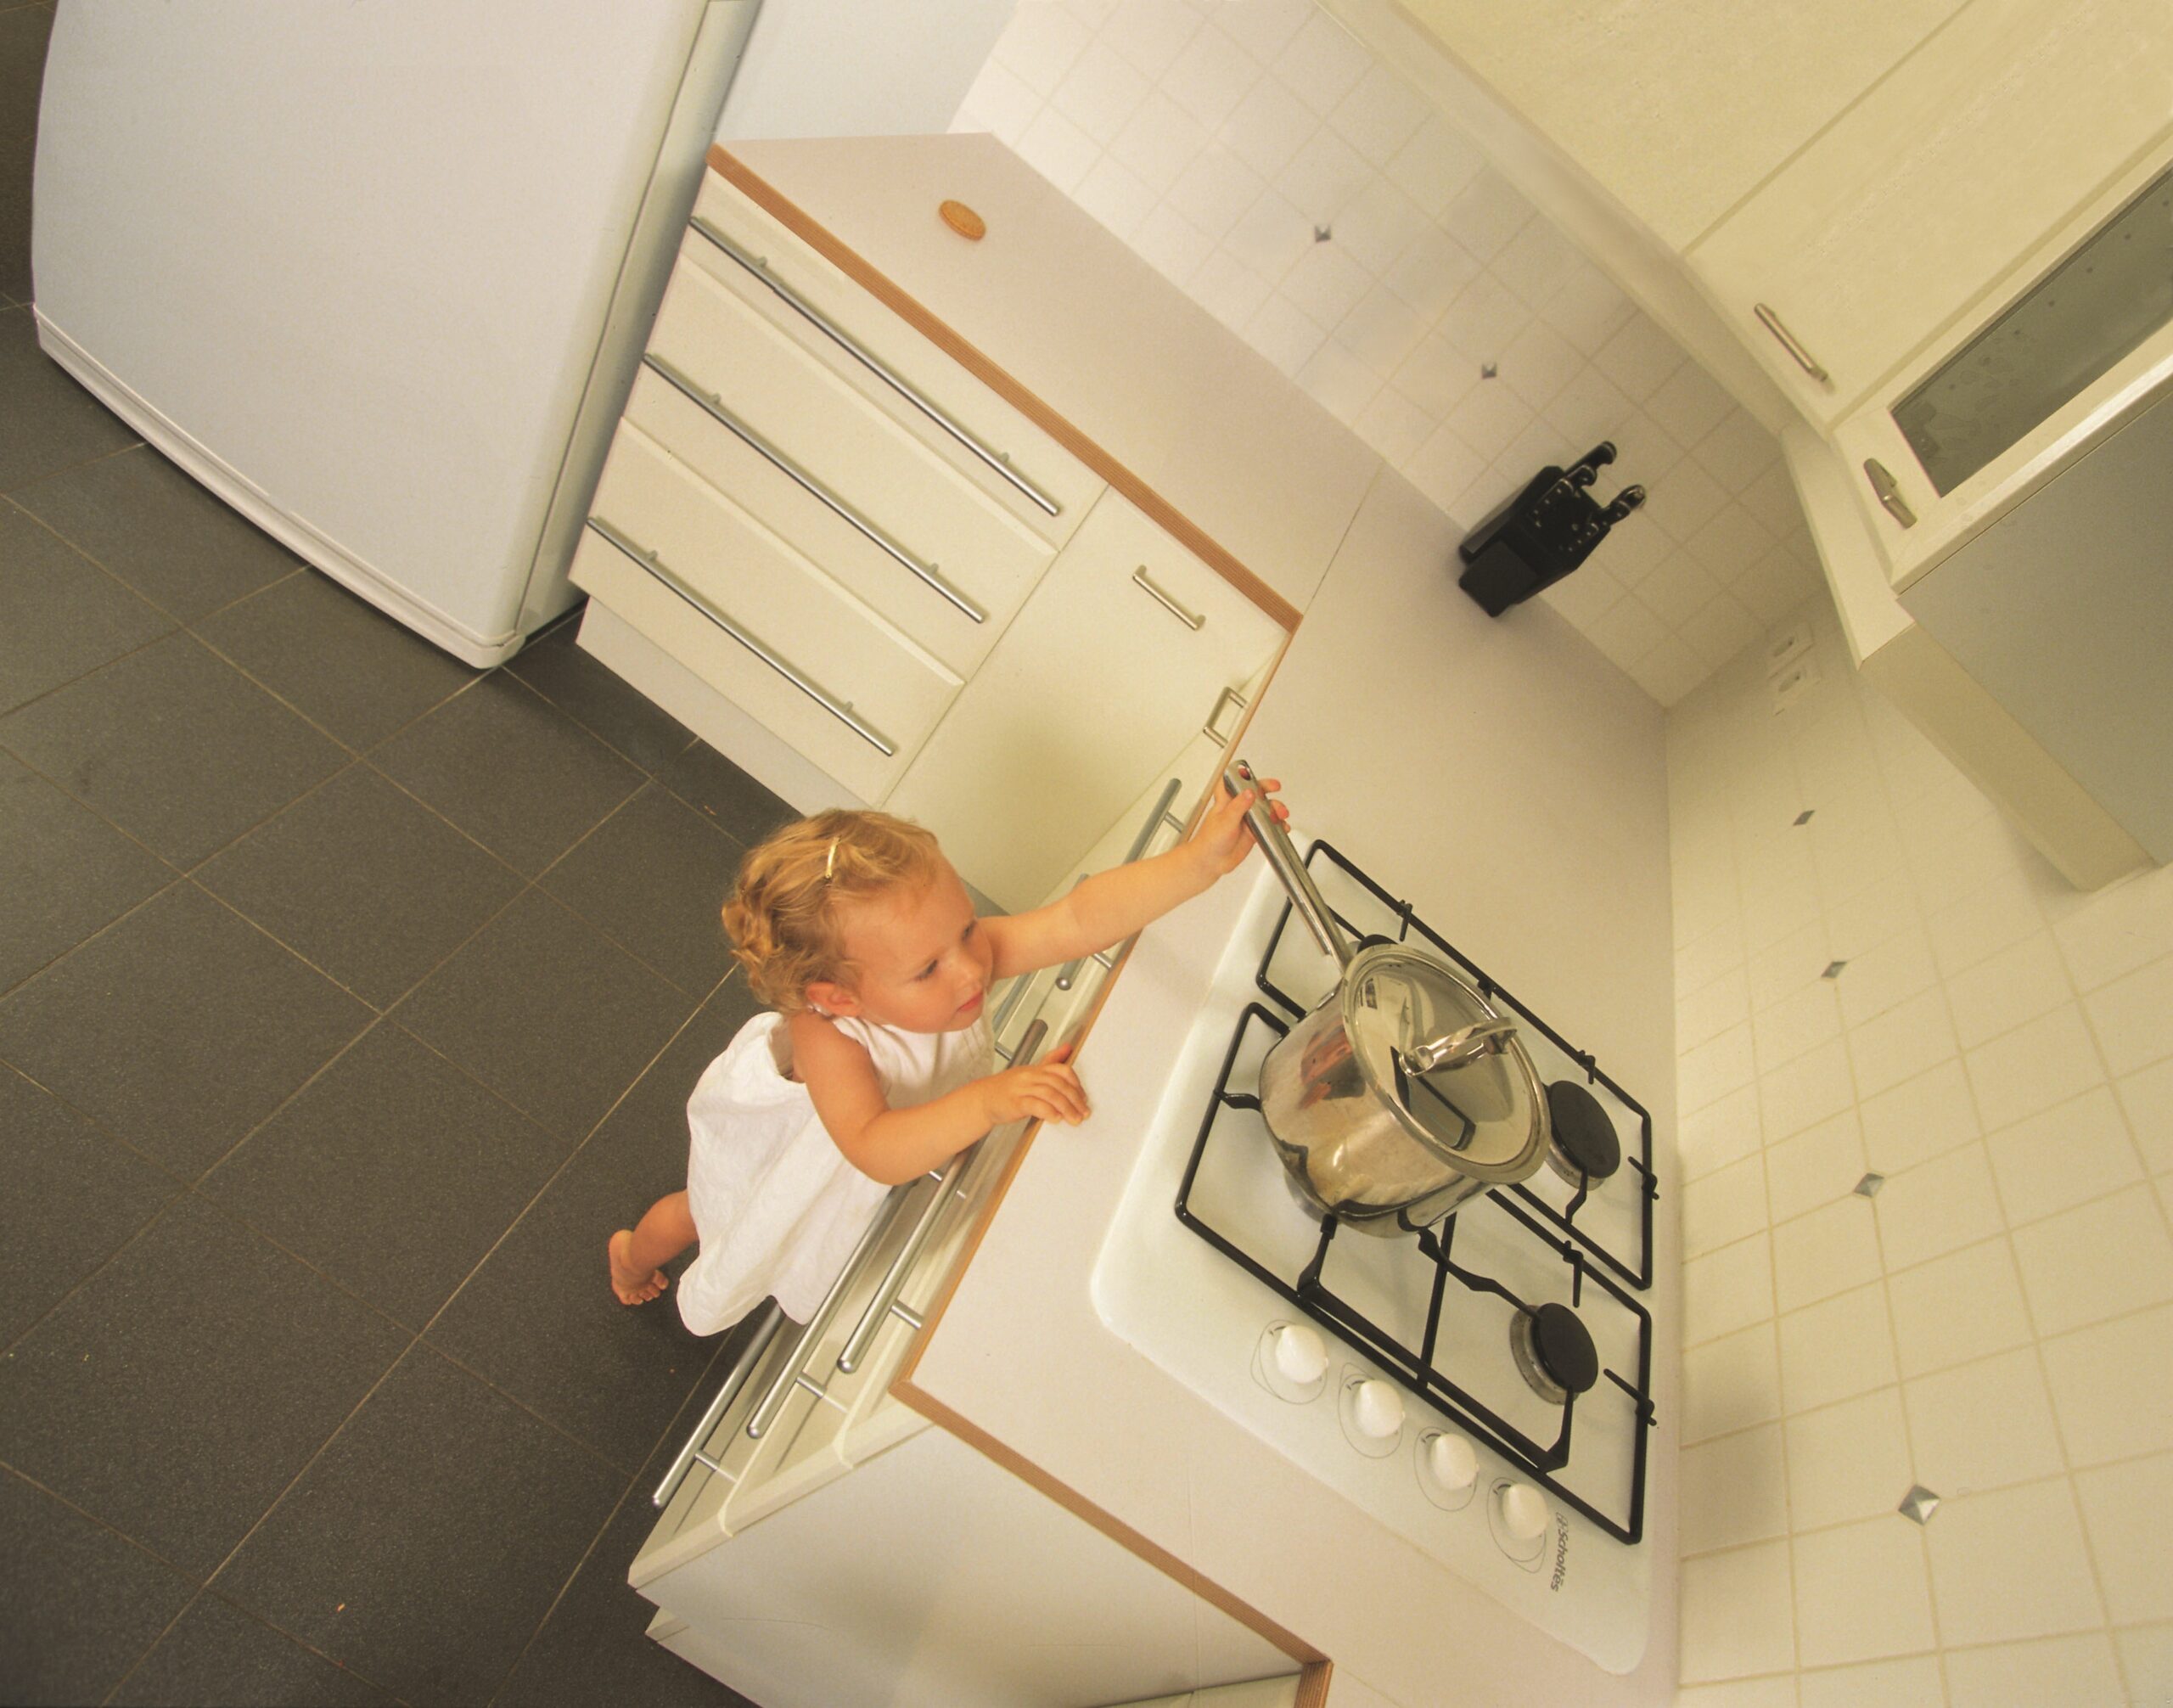 Child reaching for pan on the hob.